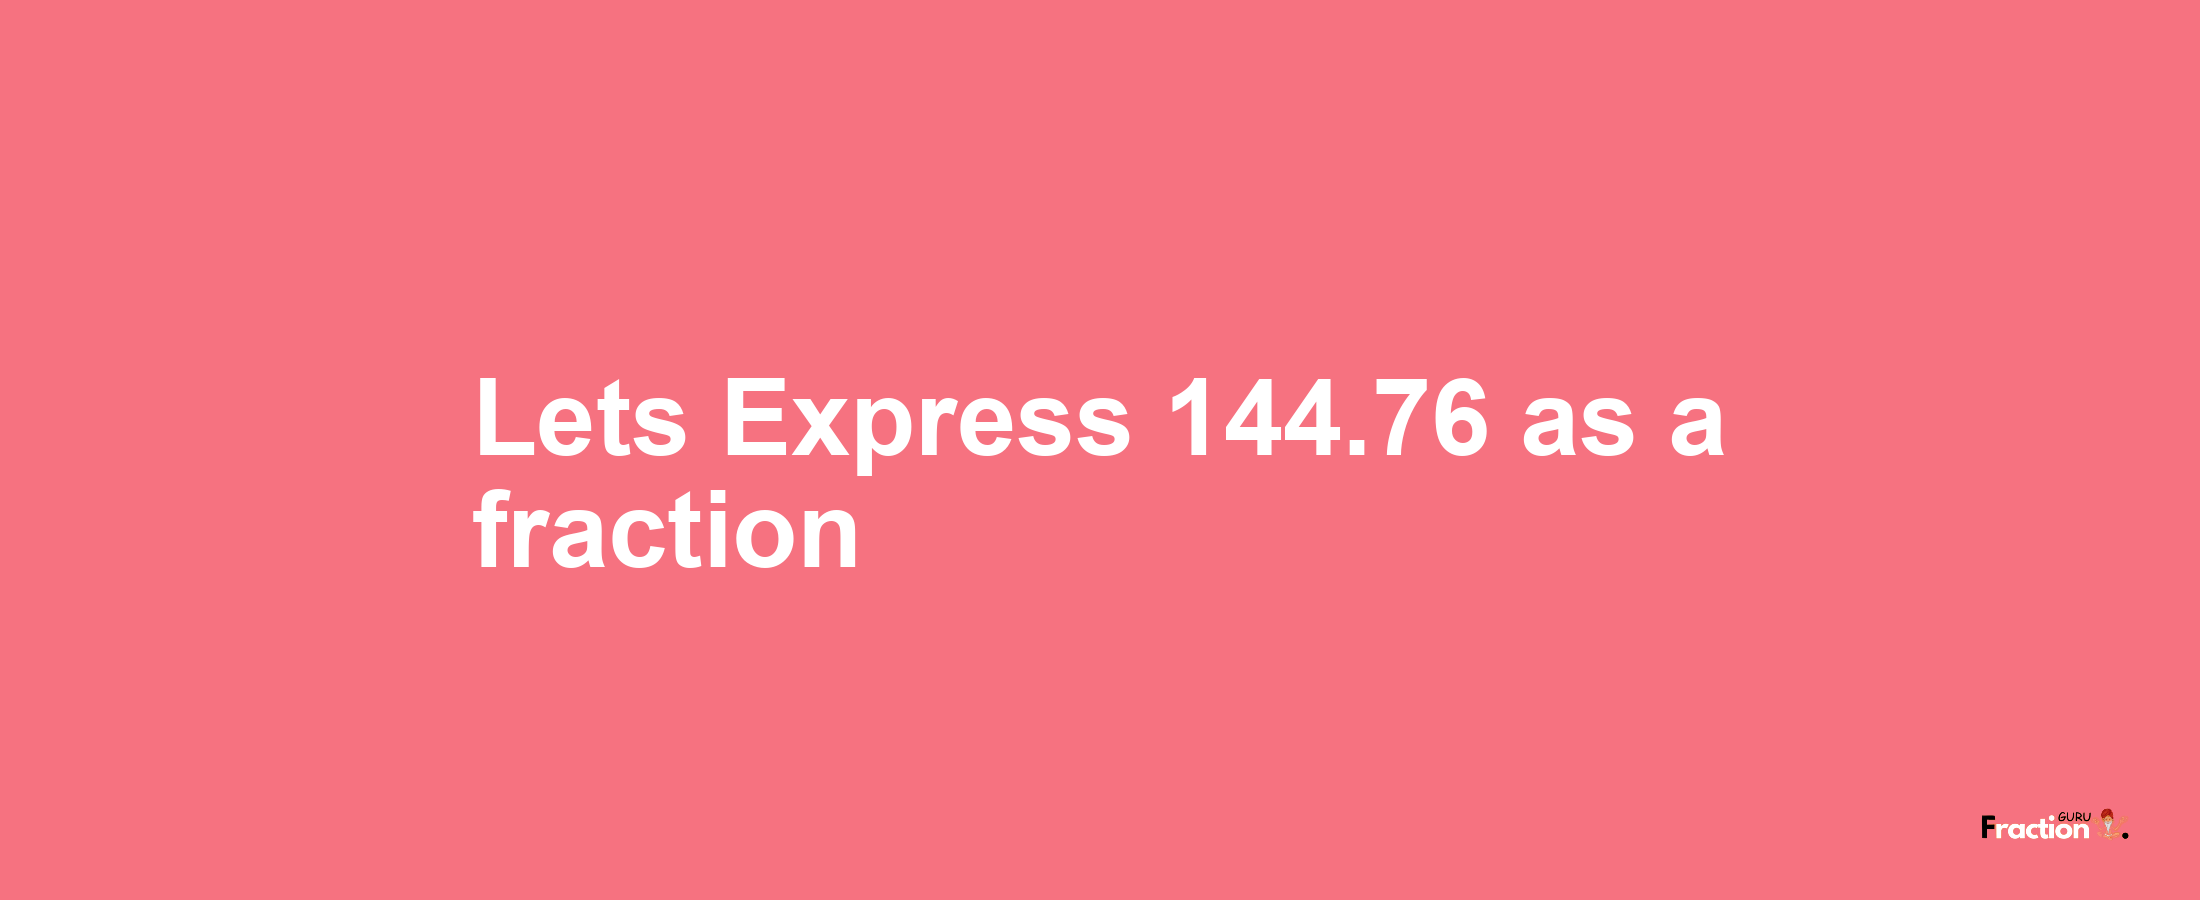 Lets Express 144.76 as afraction